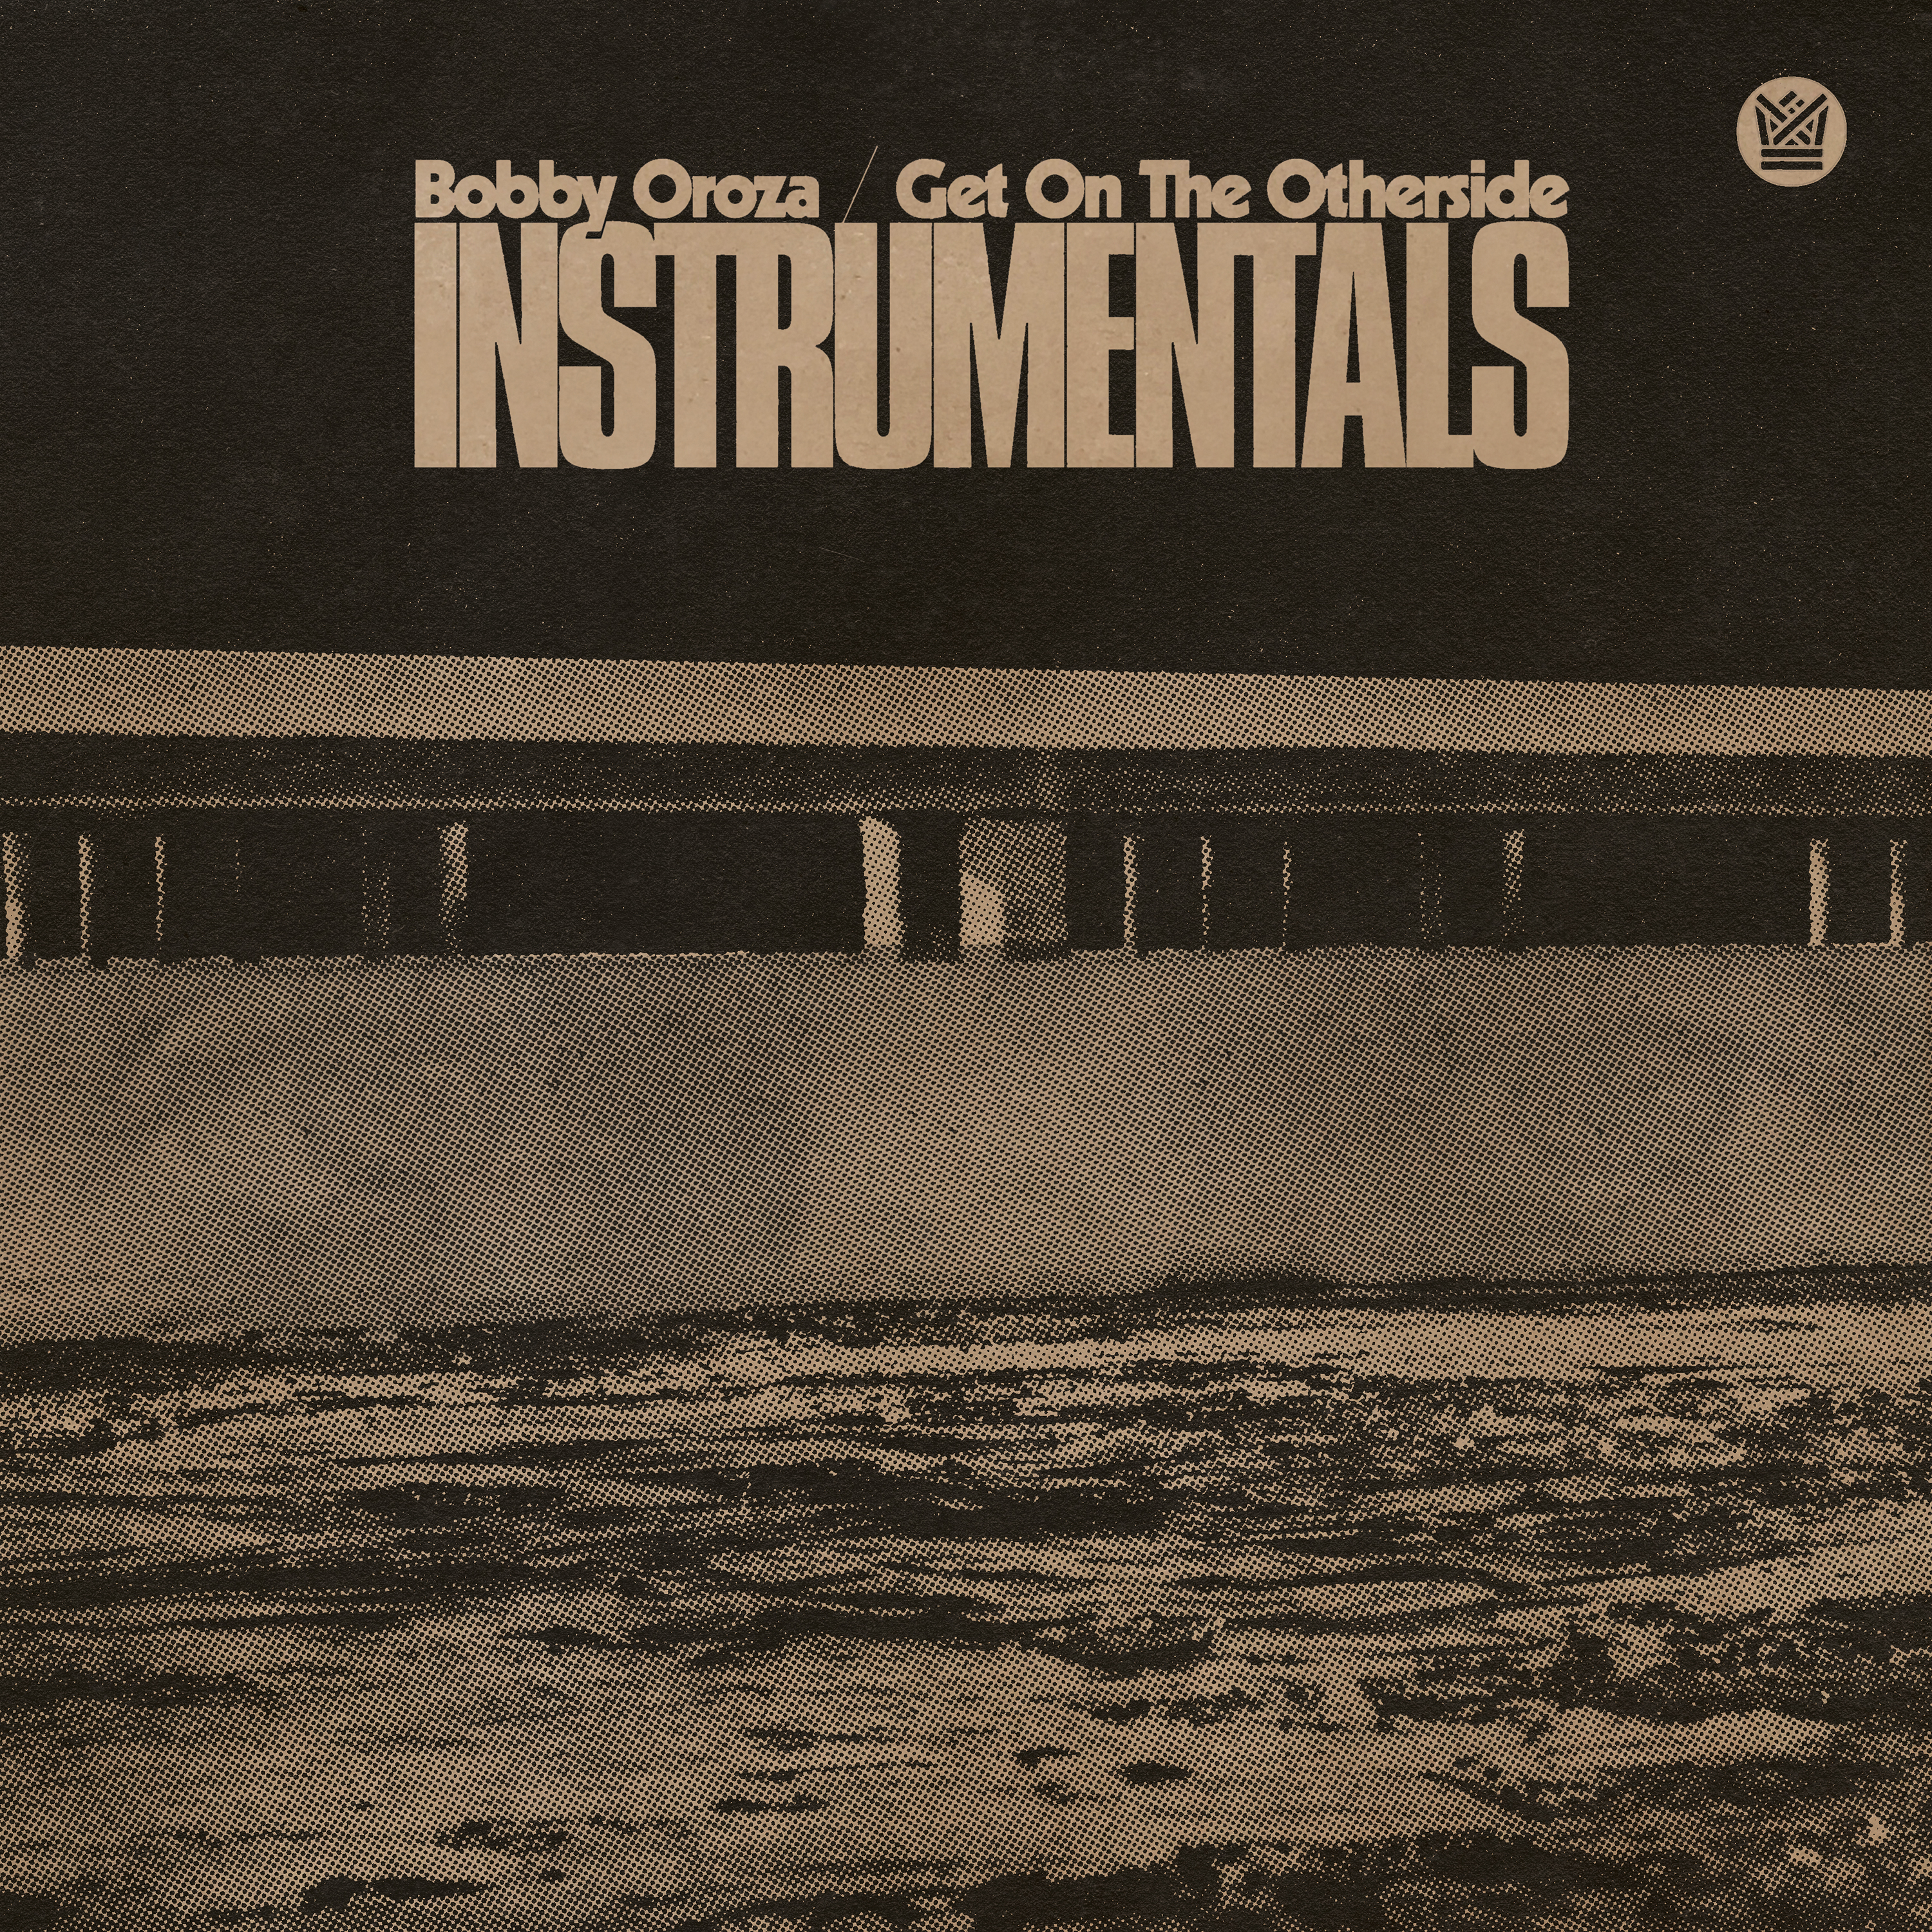 Bobby Oroza - Get On The Otherside (Instrumentals) : LP